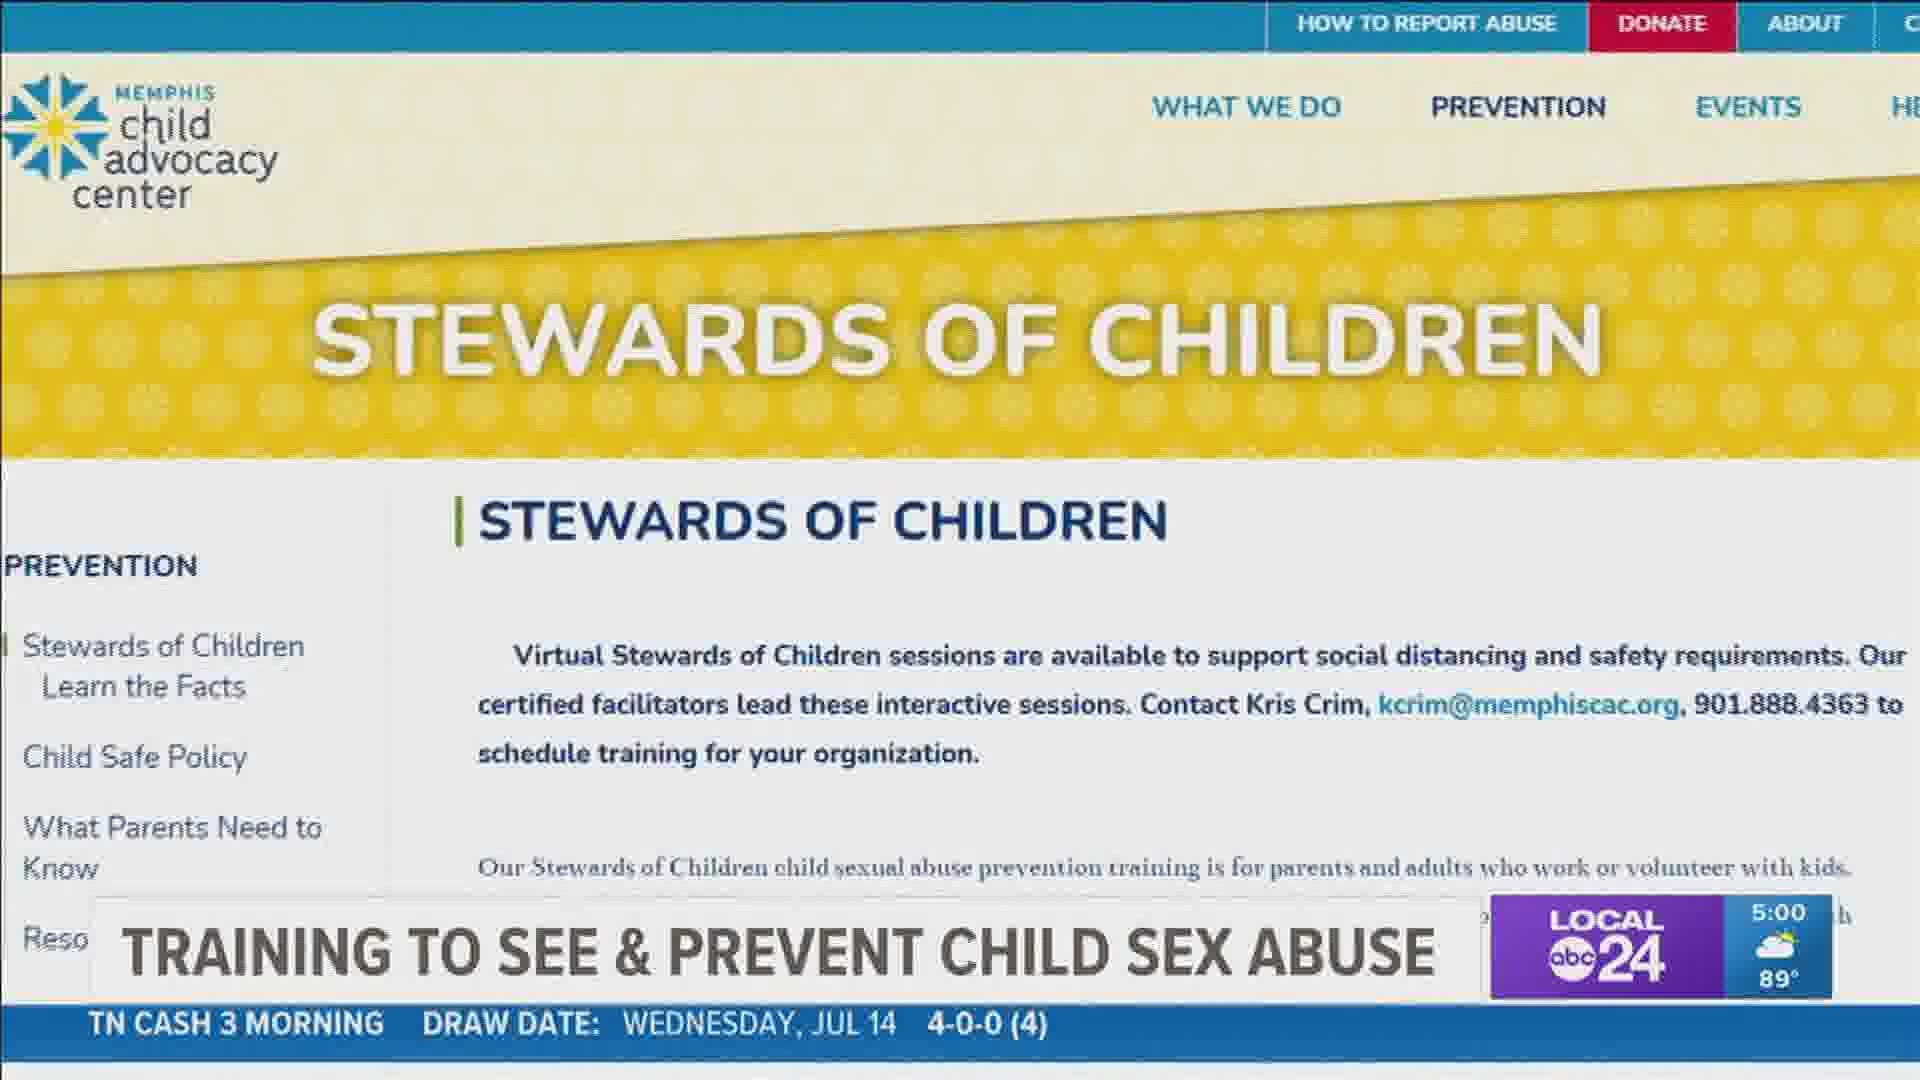 The 'Stewards of Children' course is also recommended for those leading youth-based organizations, with reminders of specific child protection recommendations.